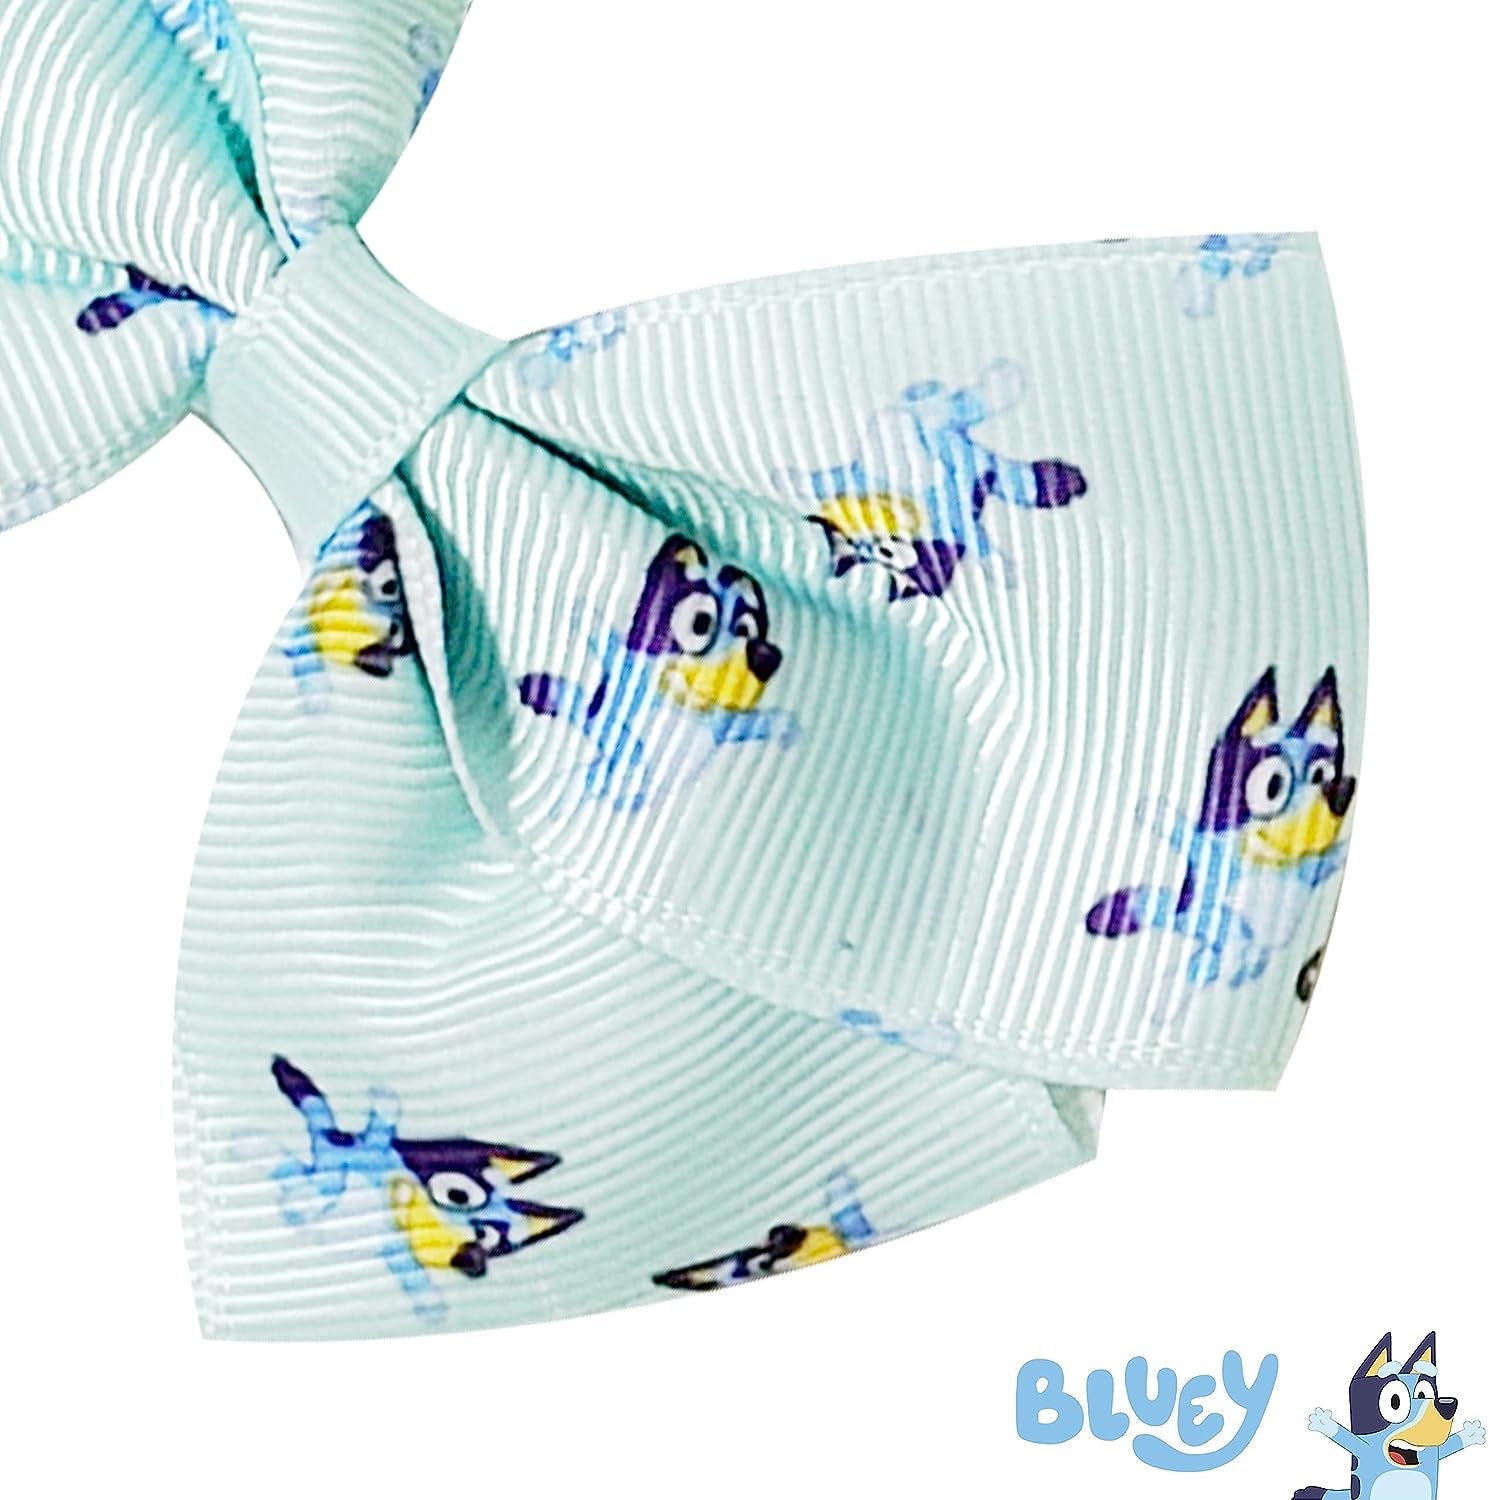 Bluey Kids Hair Bows - Hair Accessories Gift Set - Bluey Hair Bows - 7 Pcs 4 Inch Bow Bundle - Hair Bows for Girls - Different Bluey Print on Each Clip - Alligator Clip - Ages 3 +